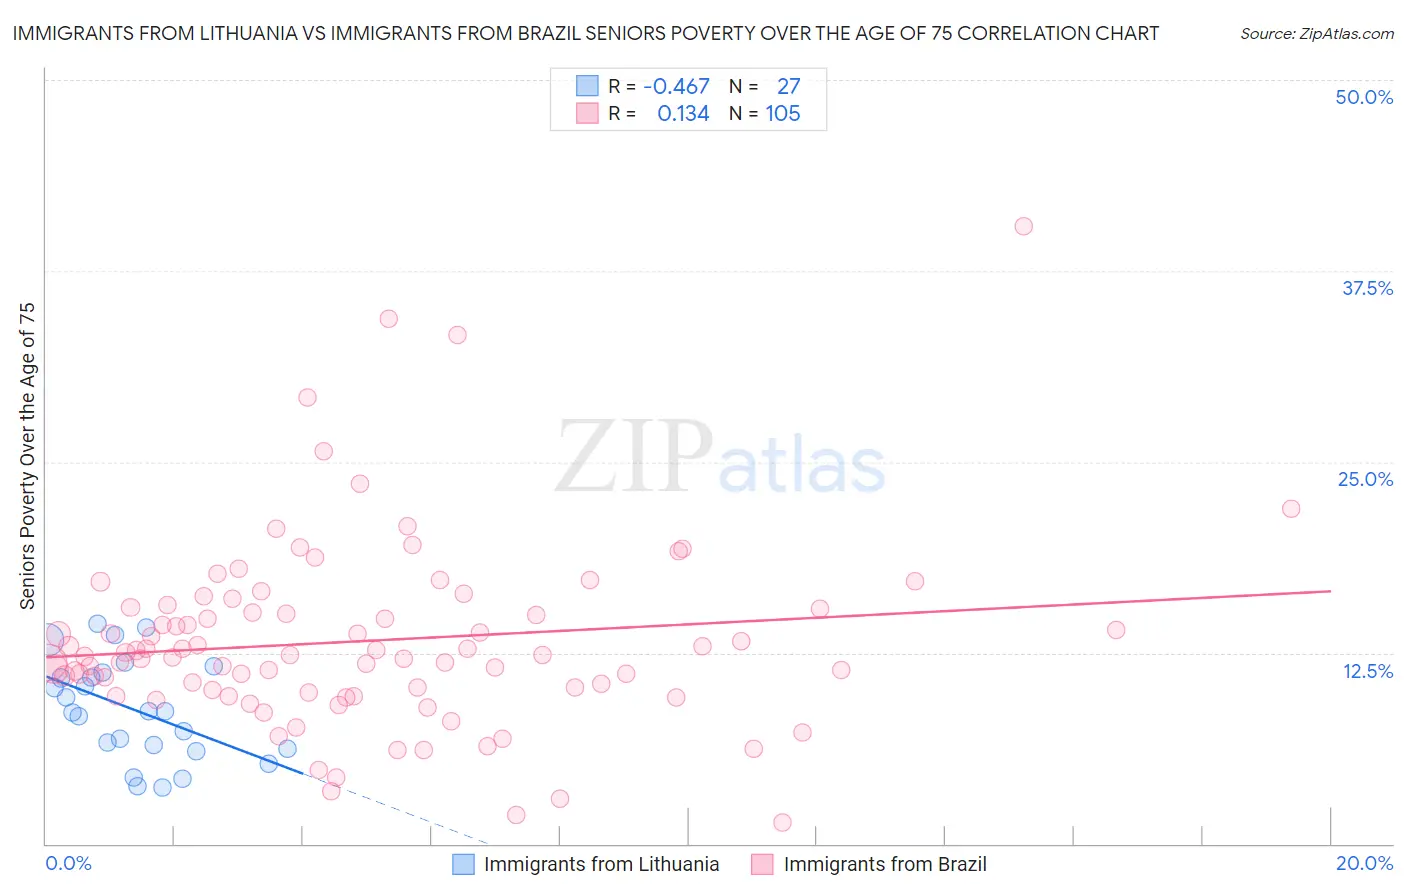 Immigrants from Lithuania vs Immigrants from Brazil Seniors Poverty Over the Age of 75